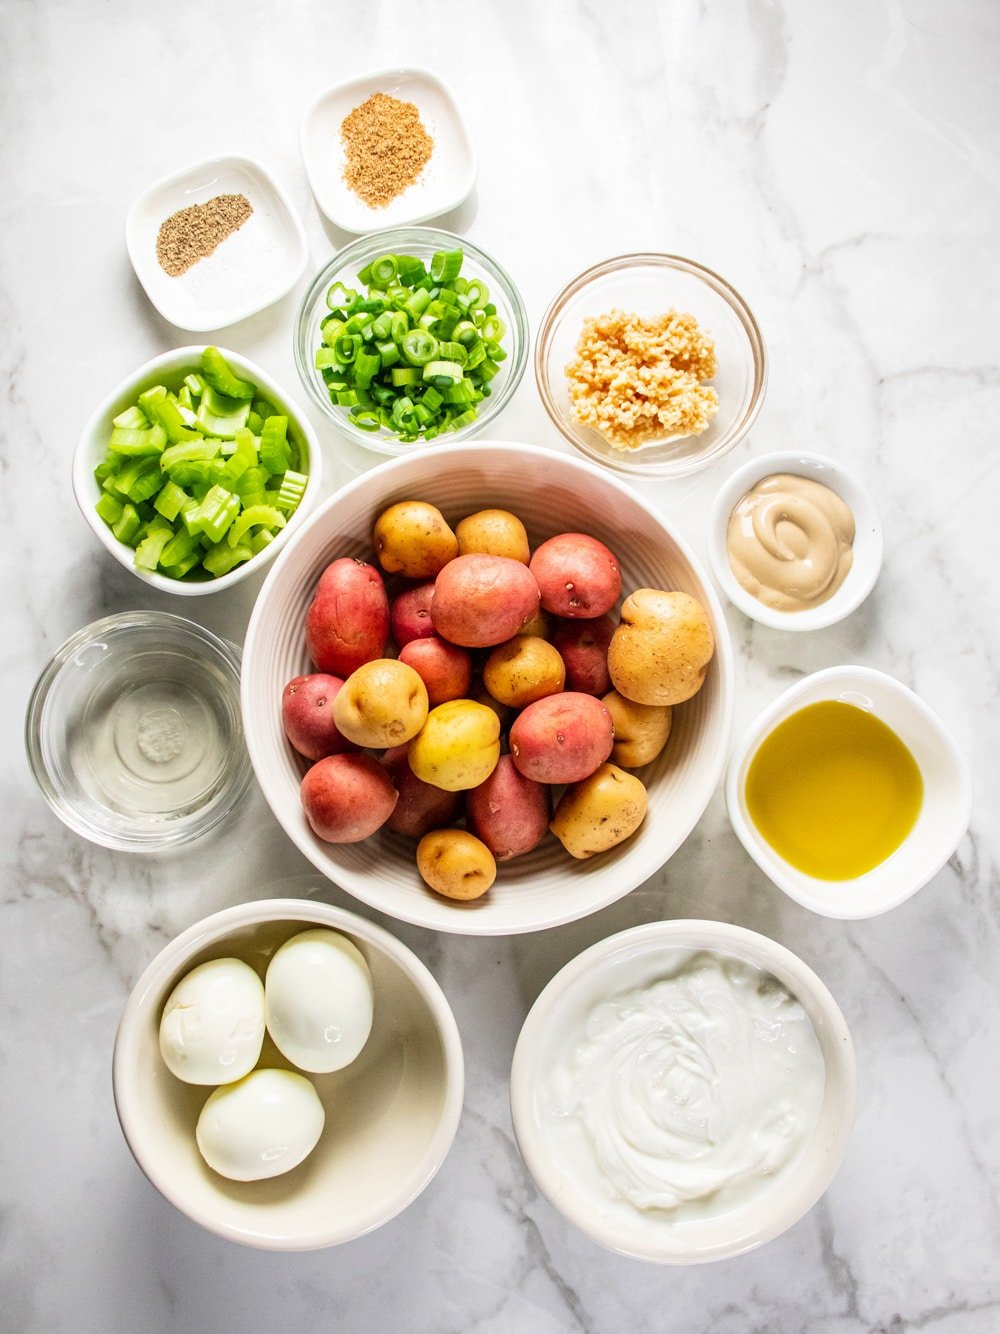 potatoes in a white bowl with ingredients for potato salad in bowls around it